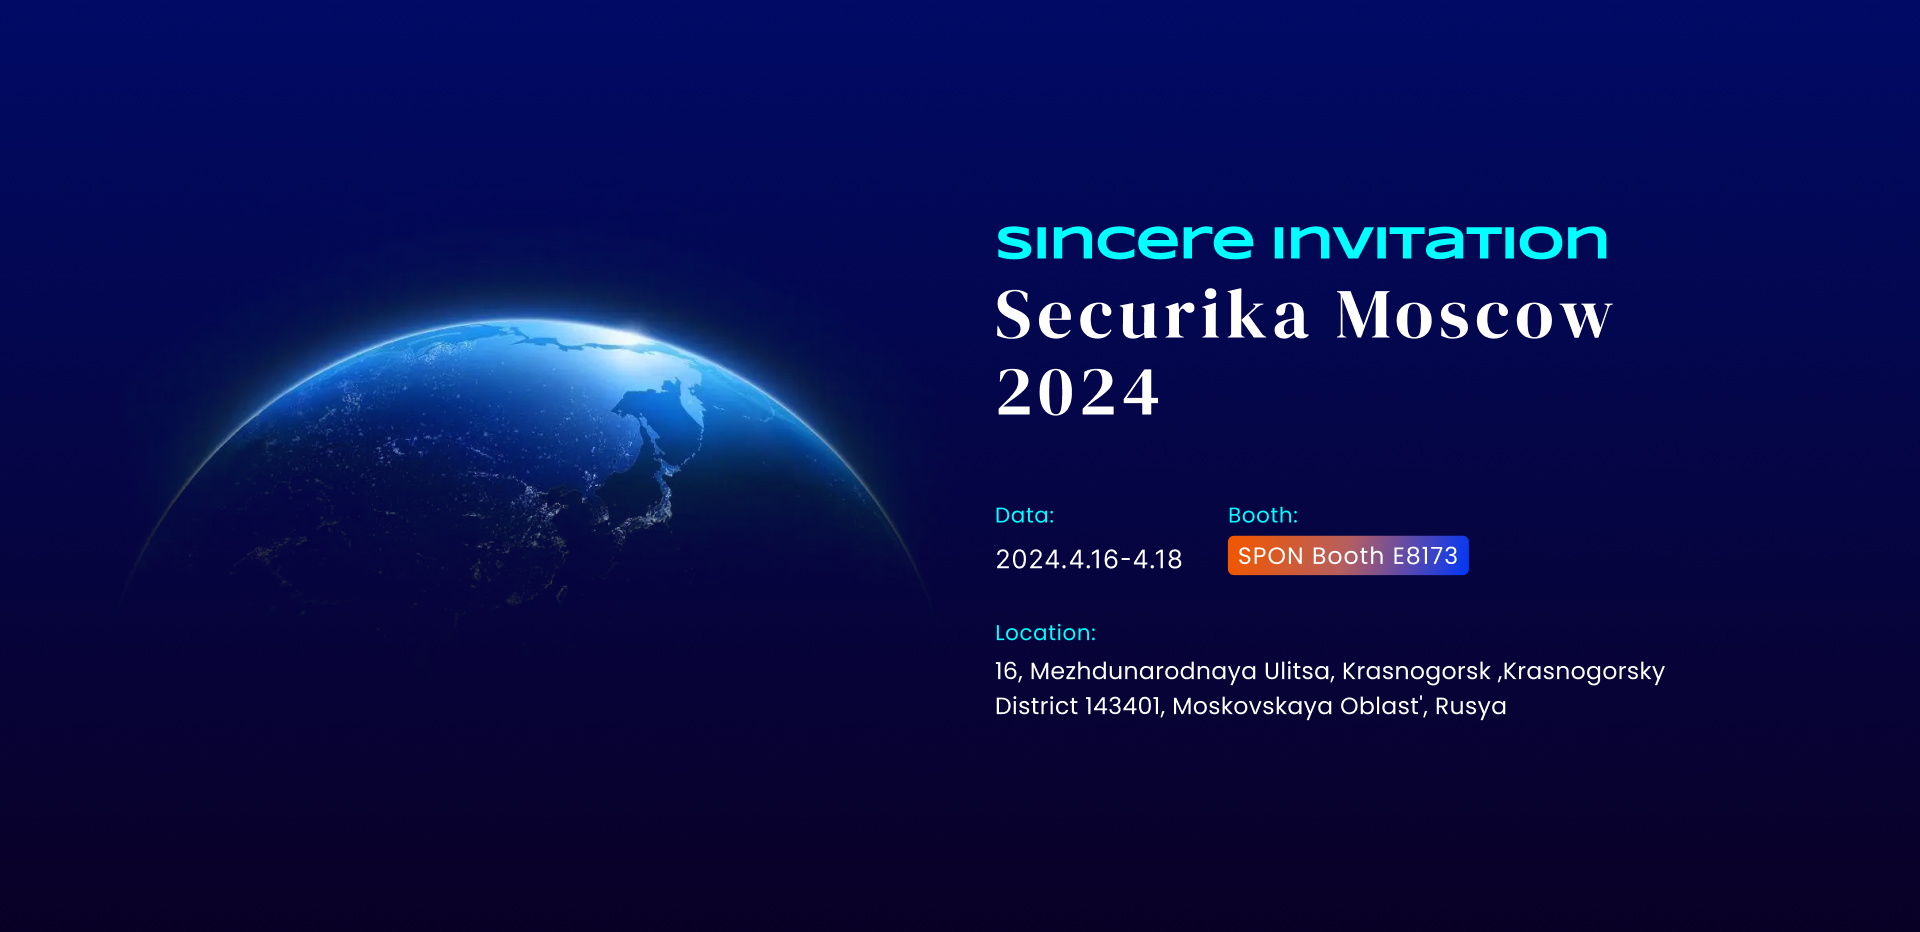 SPON Set to Present Advanced Solutions at Securika Moscow